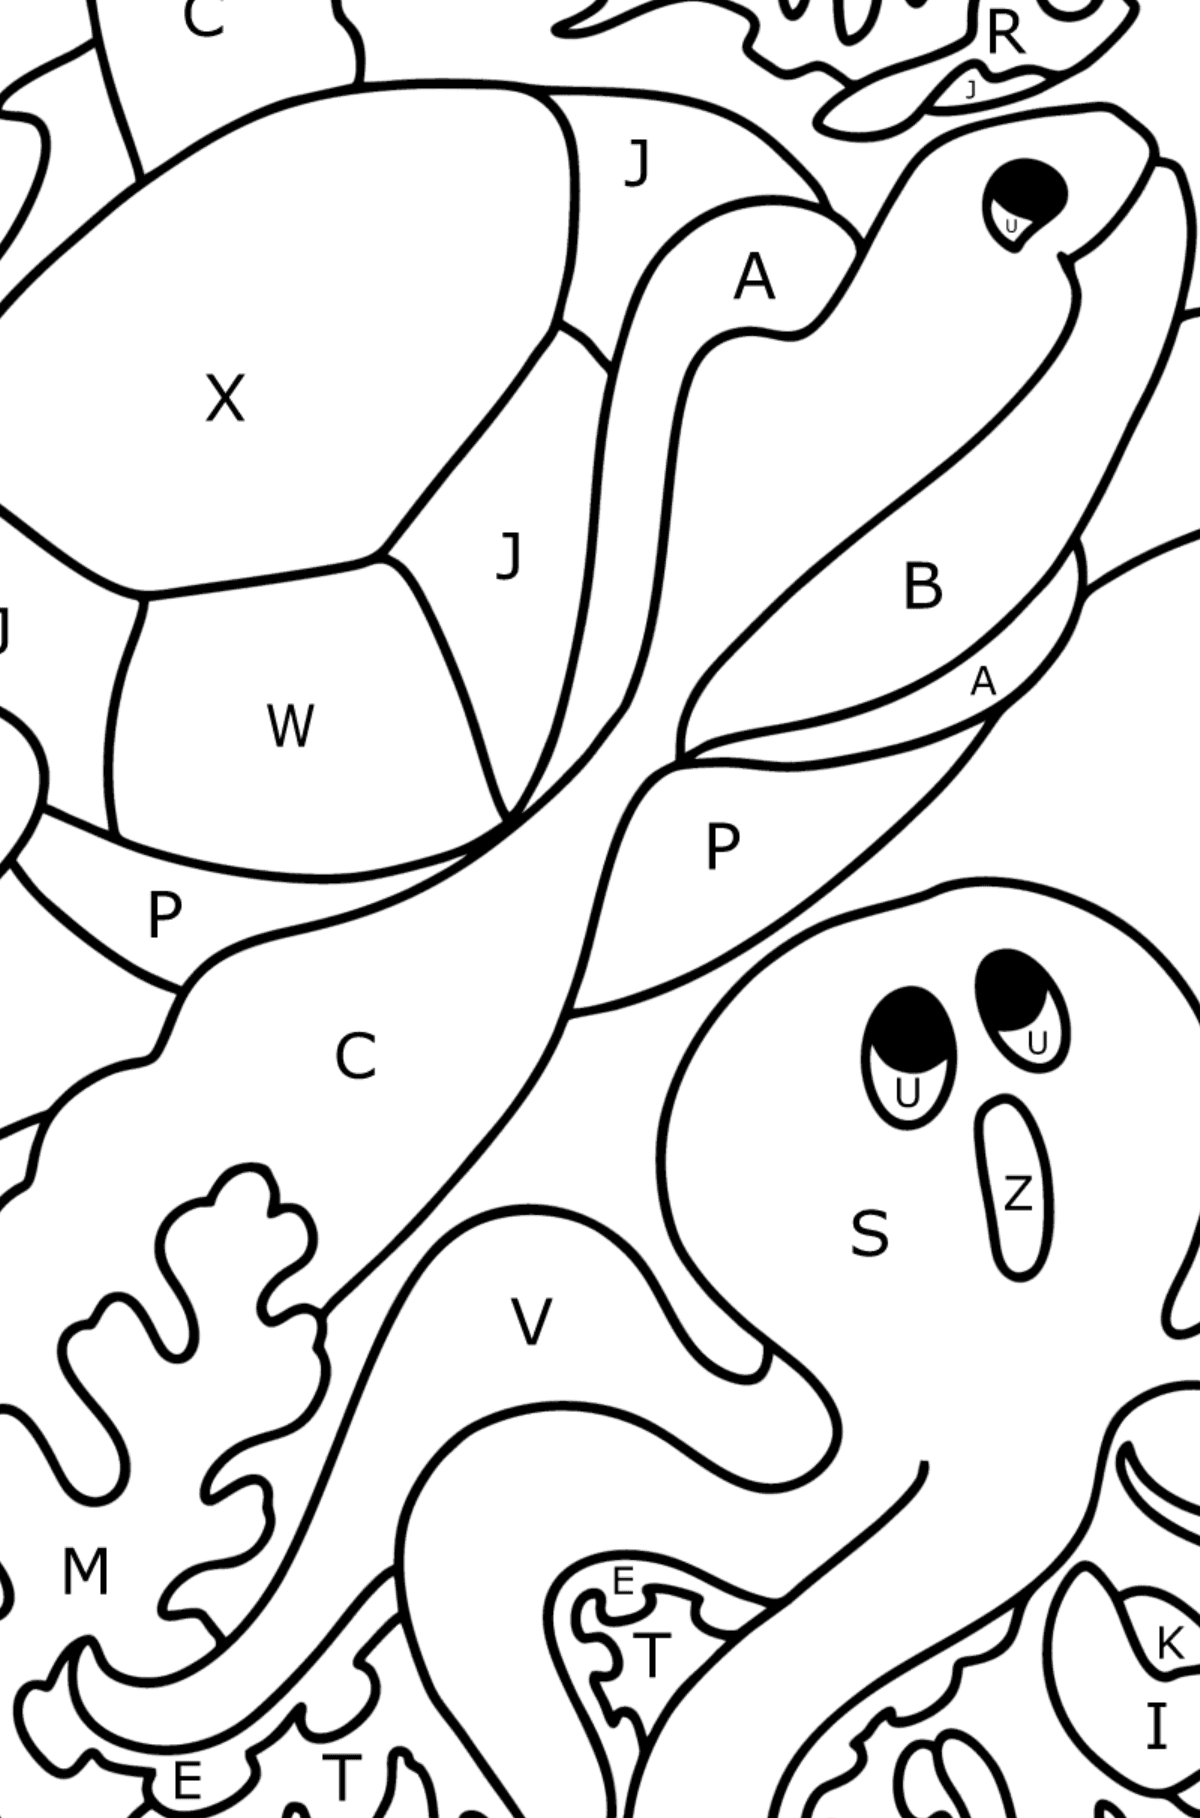 Fish, Turtle, Crab and Octopus coloring page - Coloring by Letters for Kids